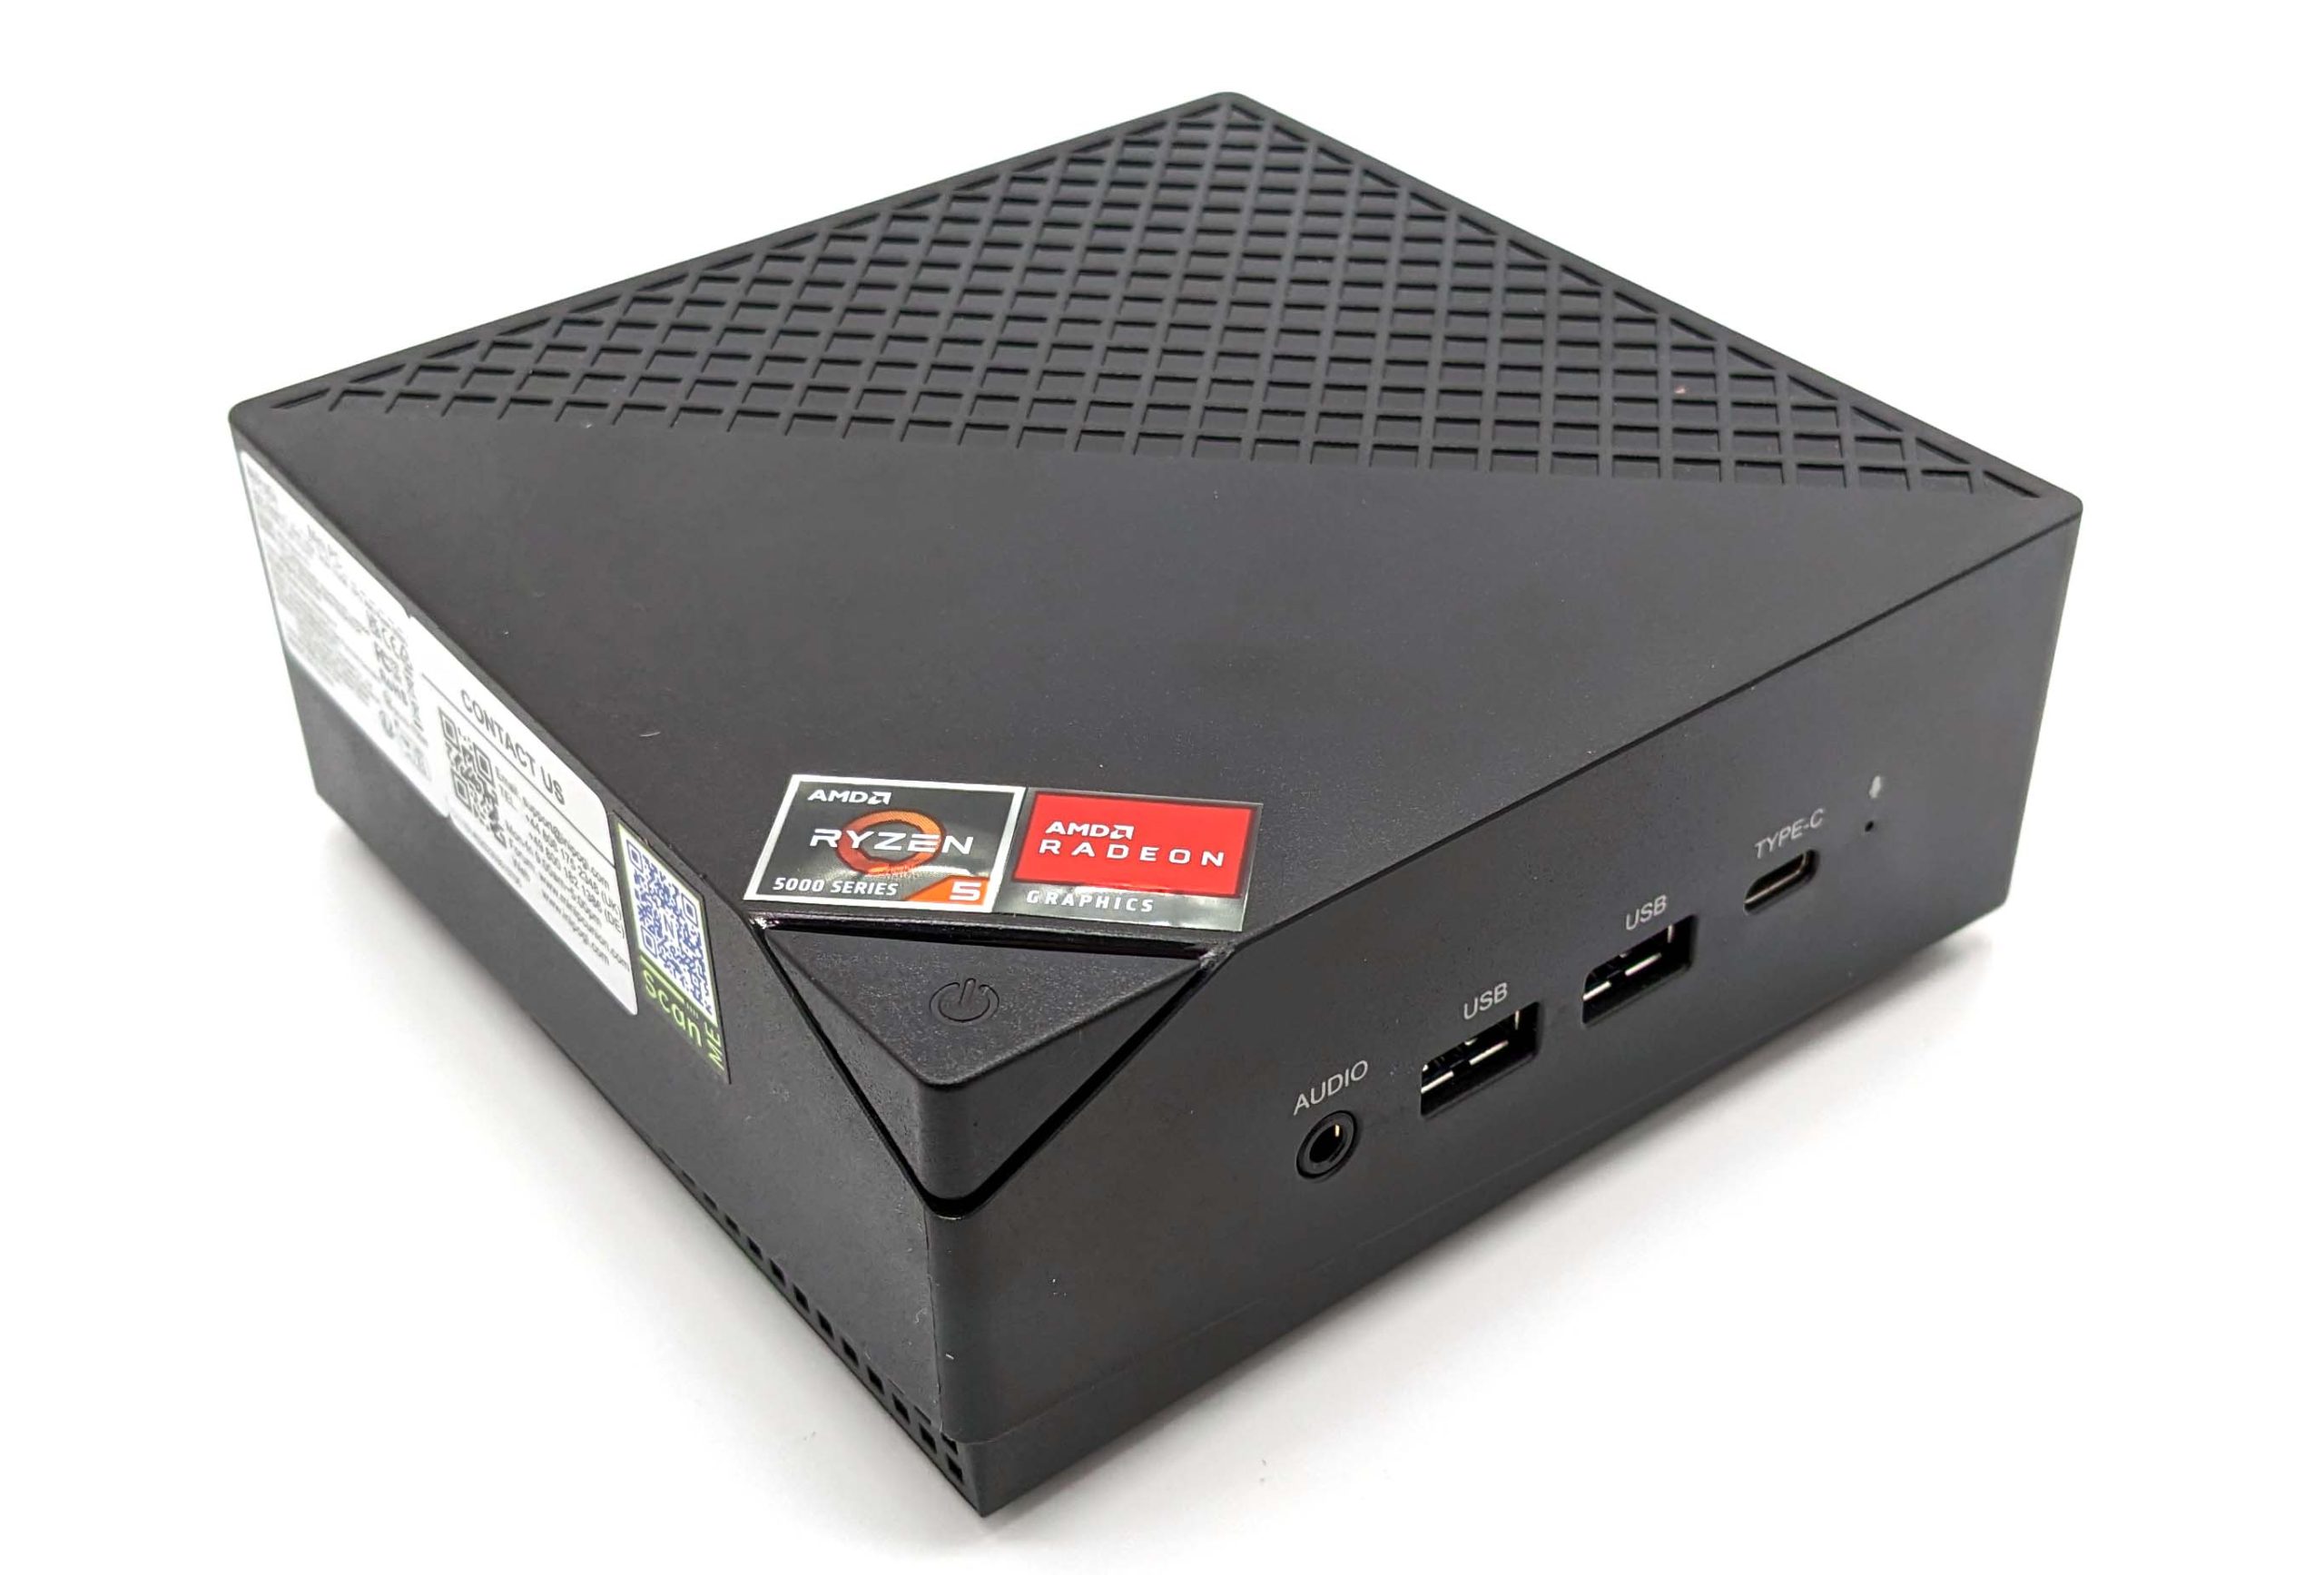 NiPoGi AM06 Pro Mini PC Review - Variety is a must!